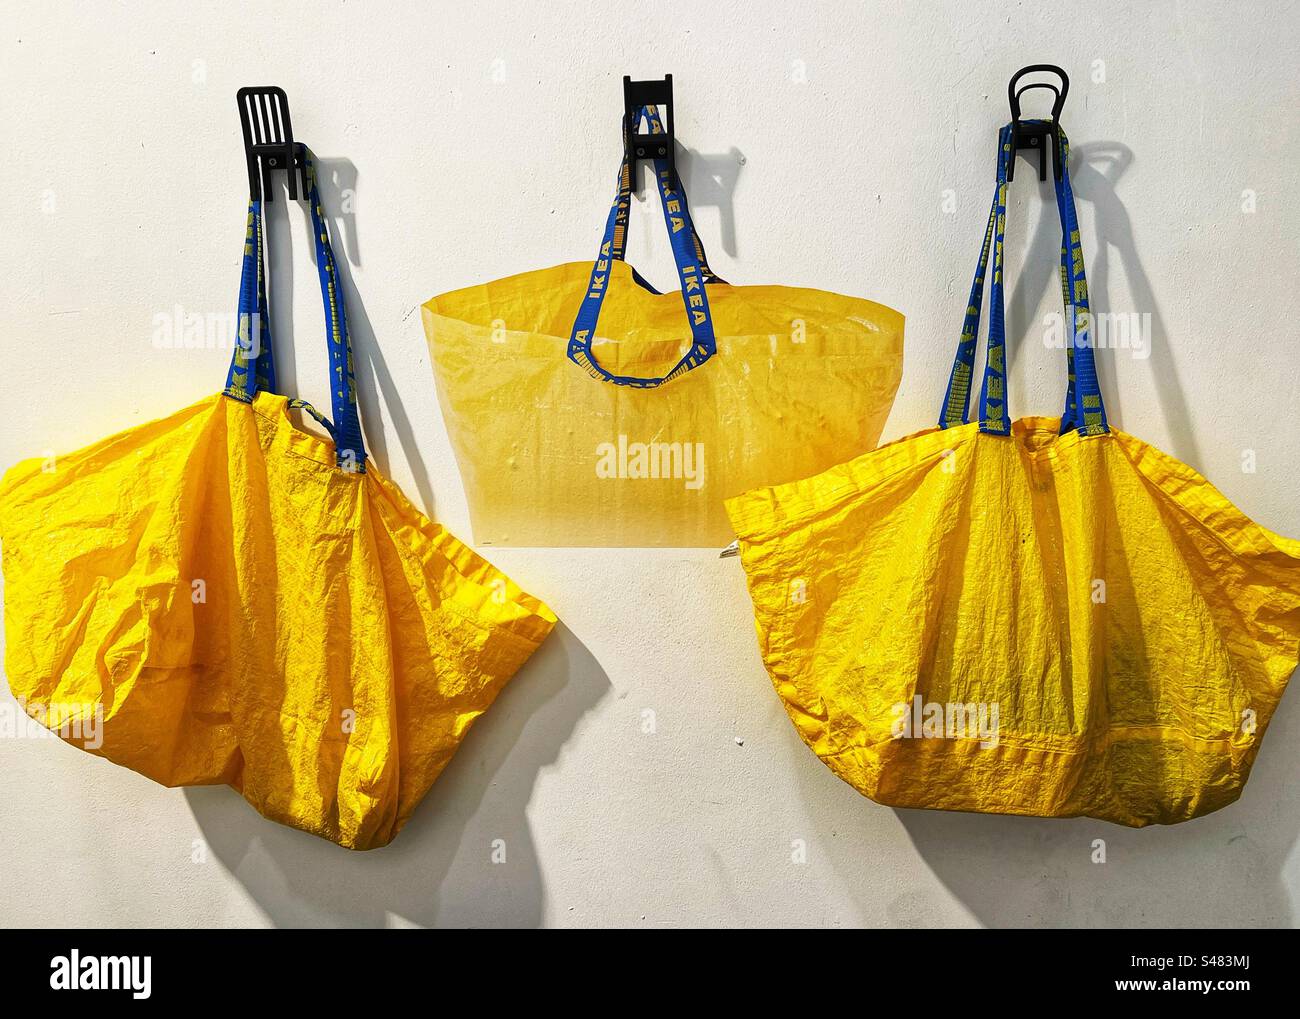 Ikea Bag Photos and Images & Pictures